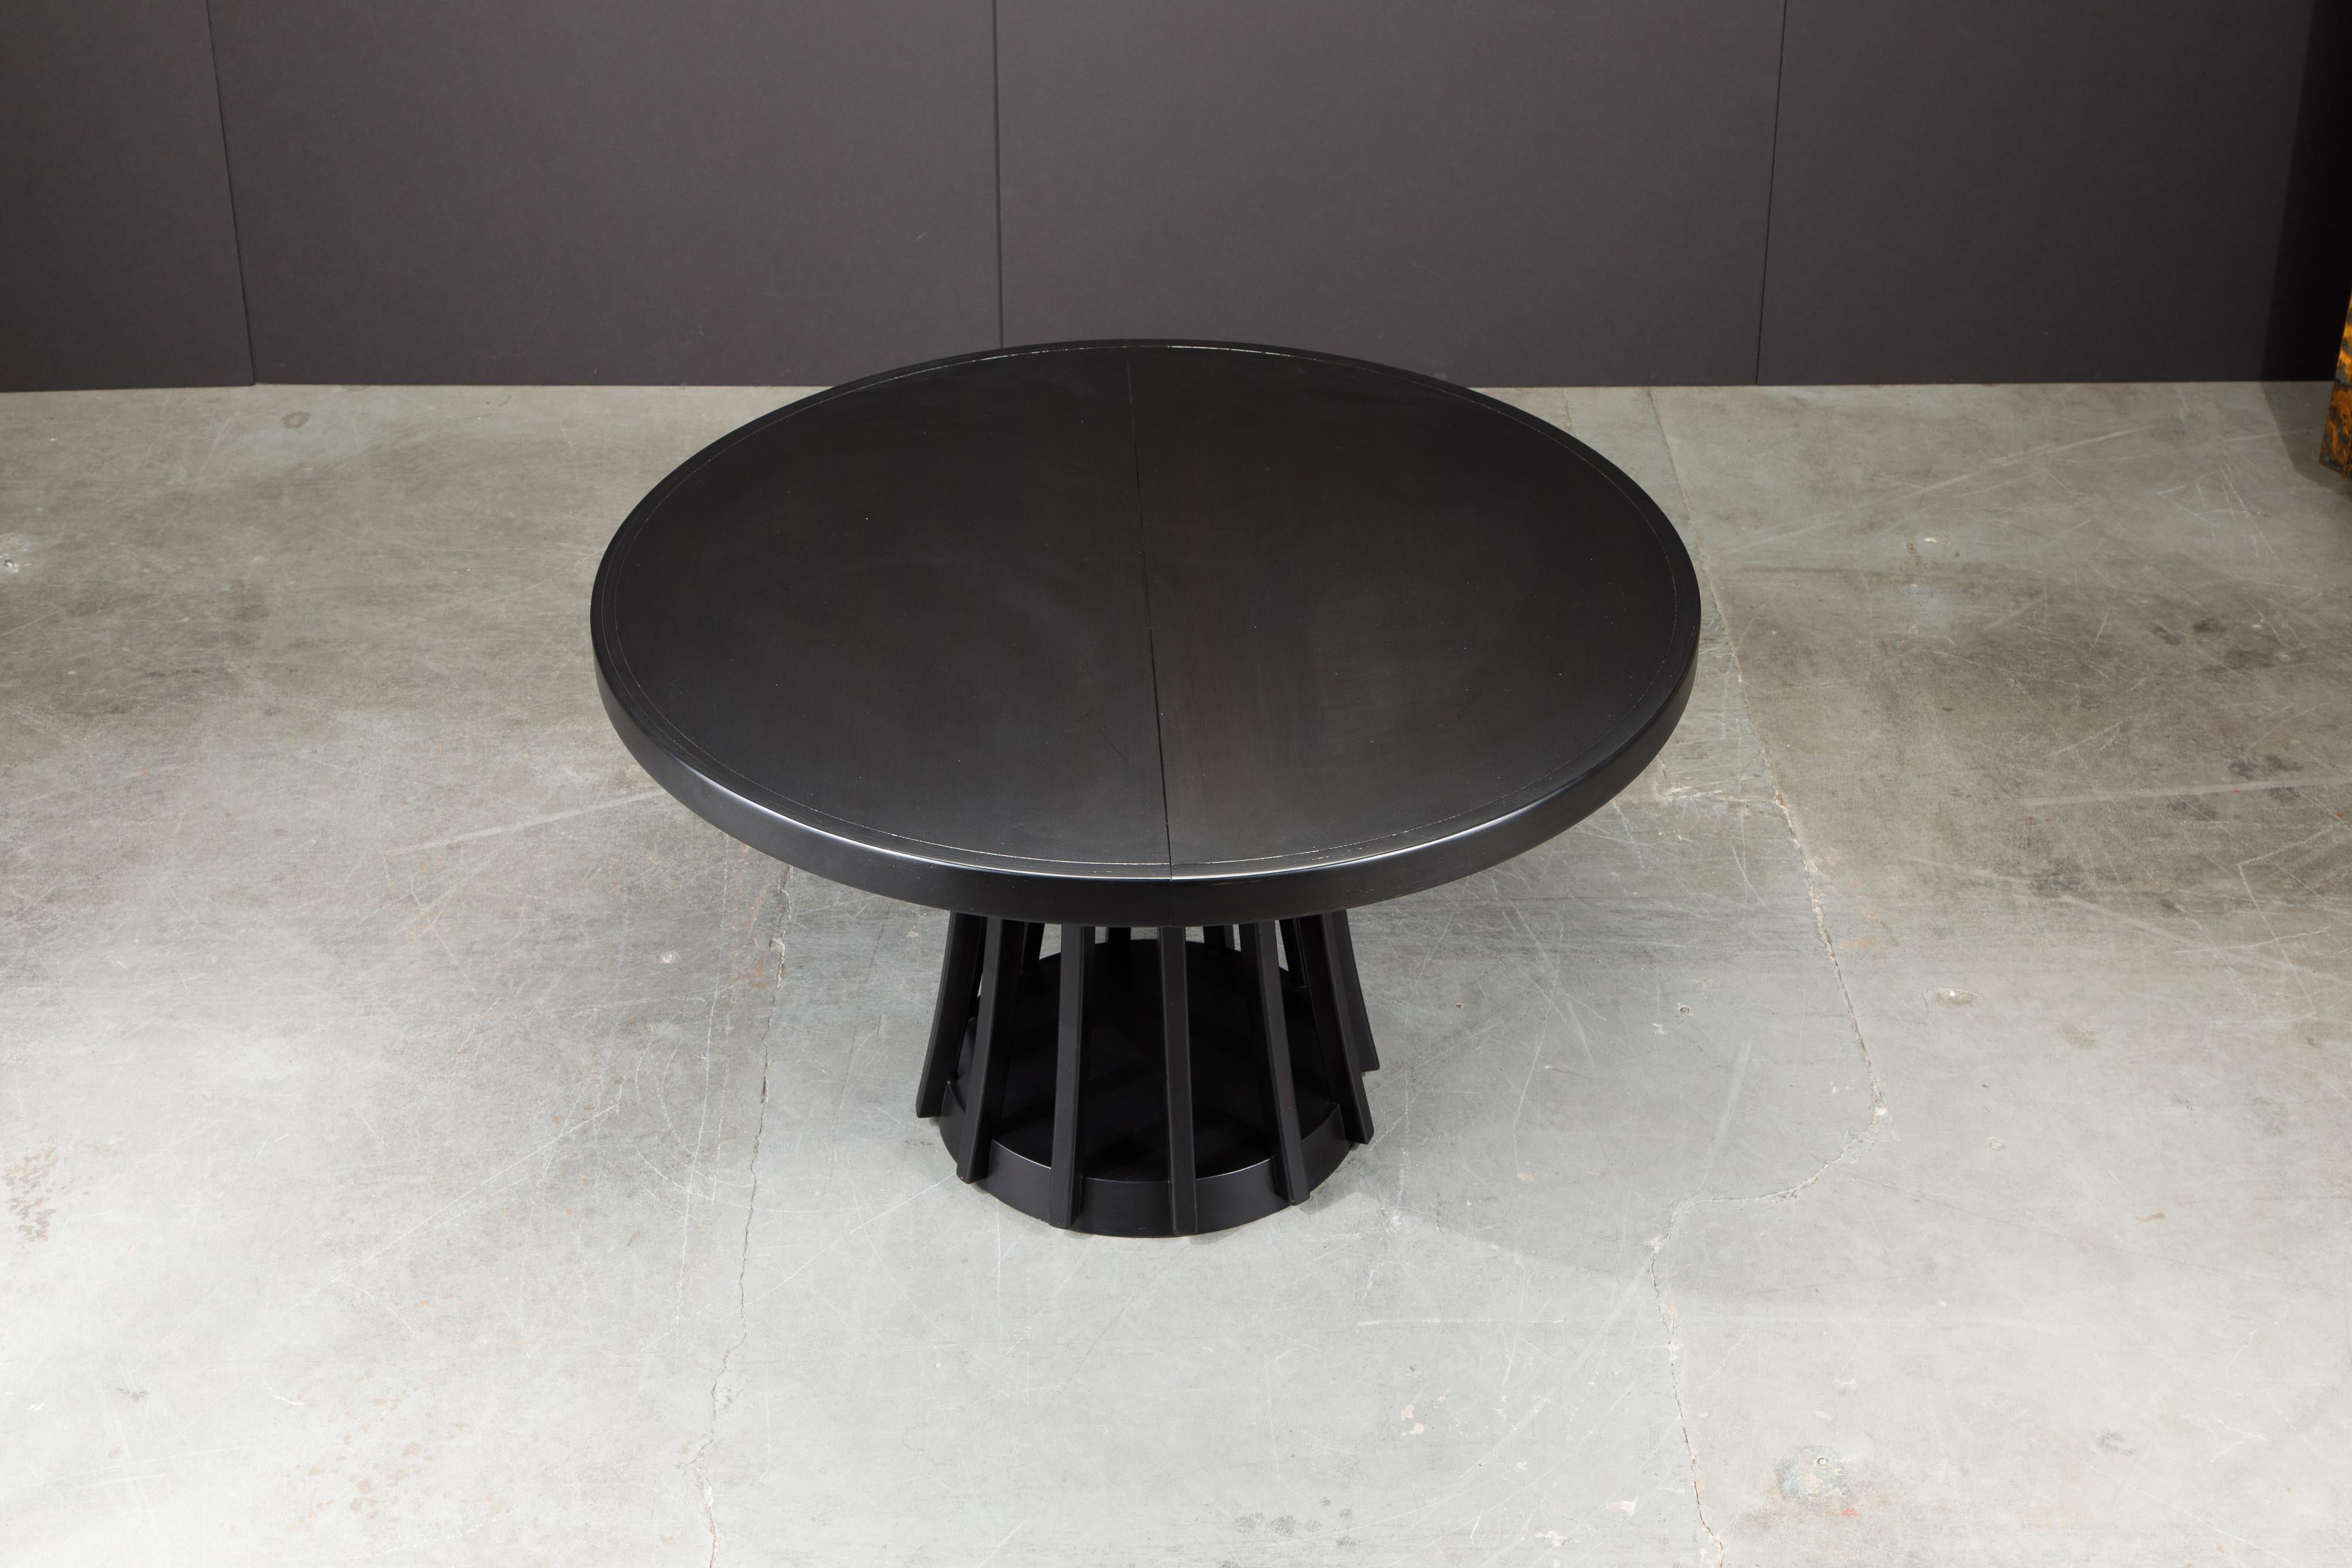 Late 20th Century 'Programma S11' Extending Dining Table by Angelo Mangiarotti, Italy, 1972